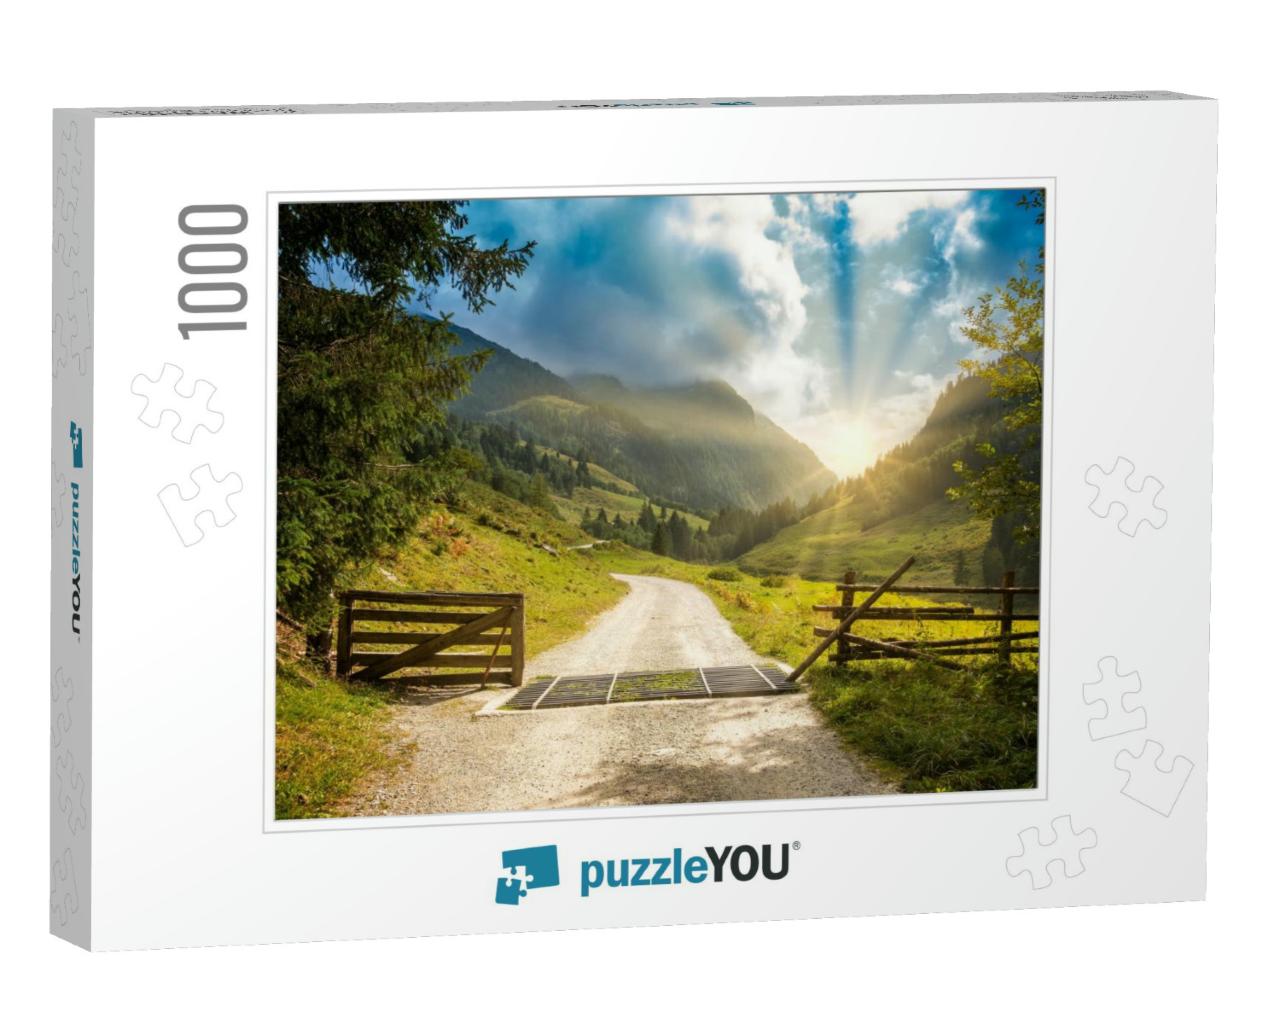 Open Gate Revealing View Over Winding Hiking Path Into Mo... Jigsaw Puzzle with 1000 pieces